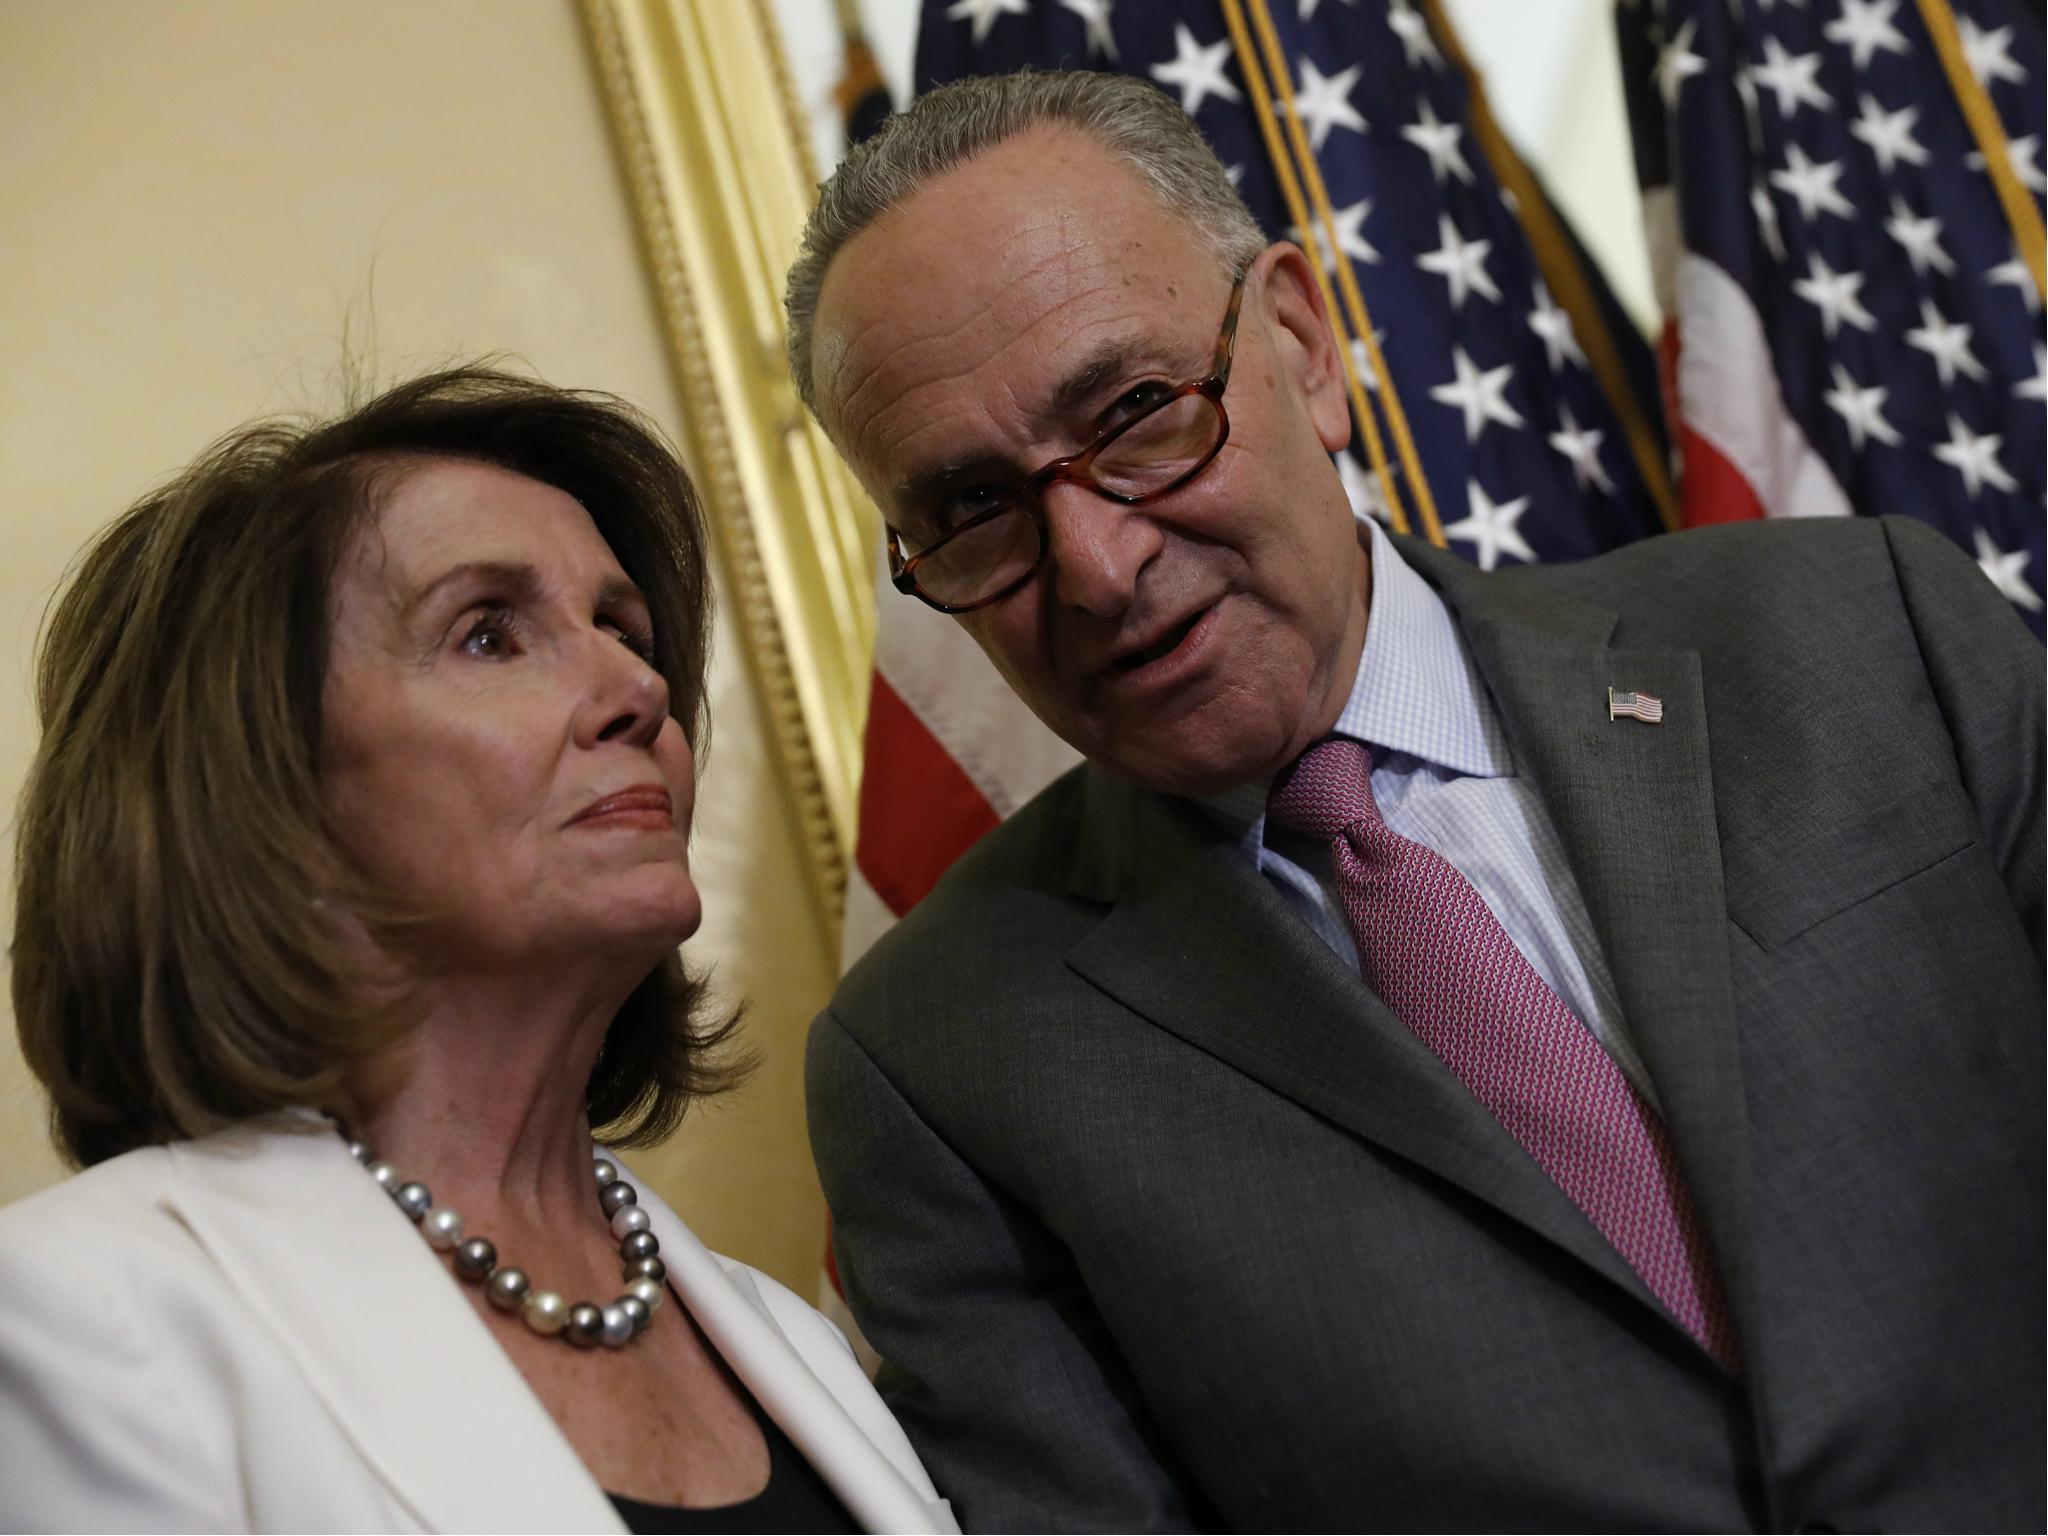 Senate Minority Leader Chuck Schumer speaks with House Minority Leader Nancy Pelosi had dinner with Donald Trump at the White House to discuss undocumented immigrants on 13 September 2017.